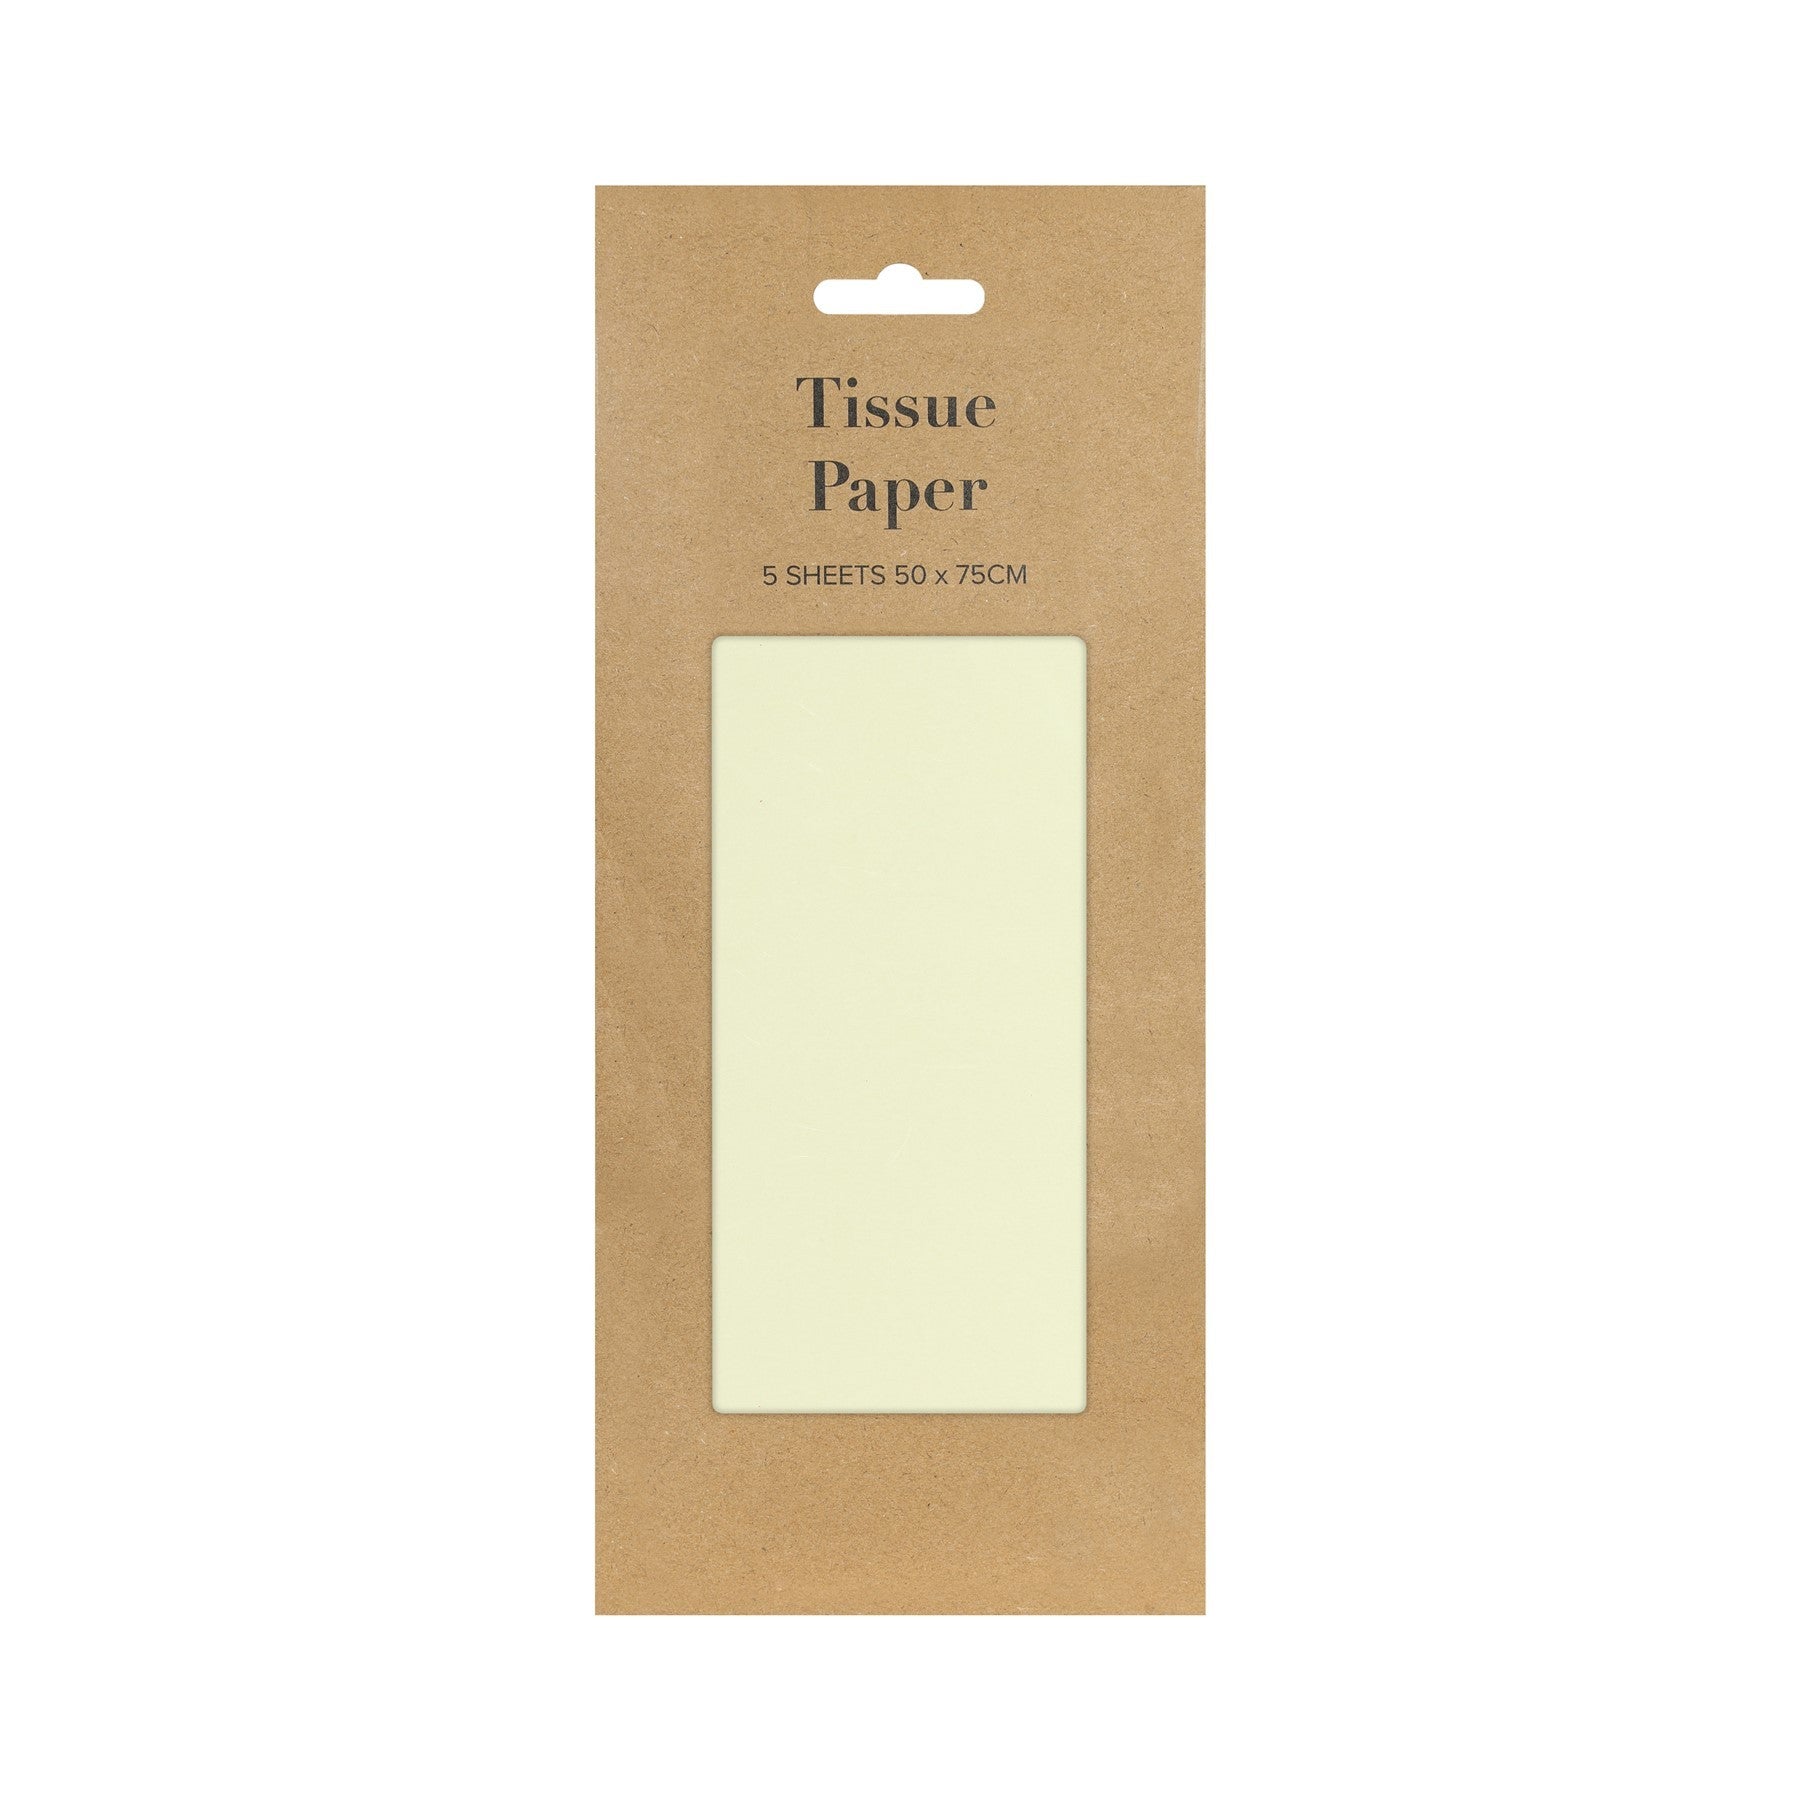 View Cream Tissue Paper Retail Pack 5 Sheets information